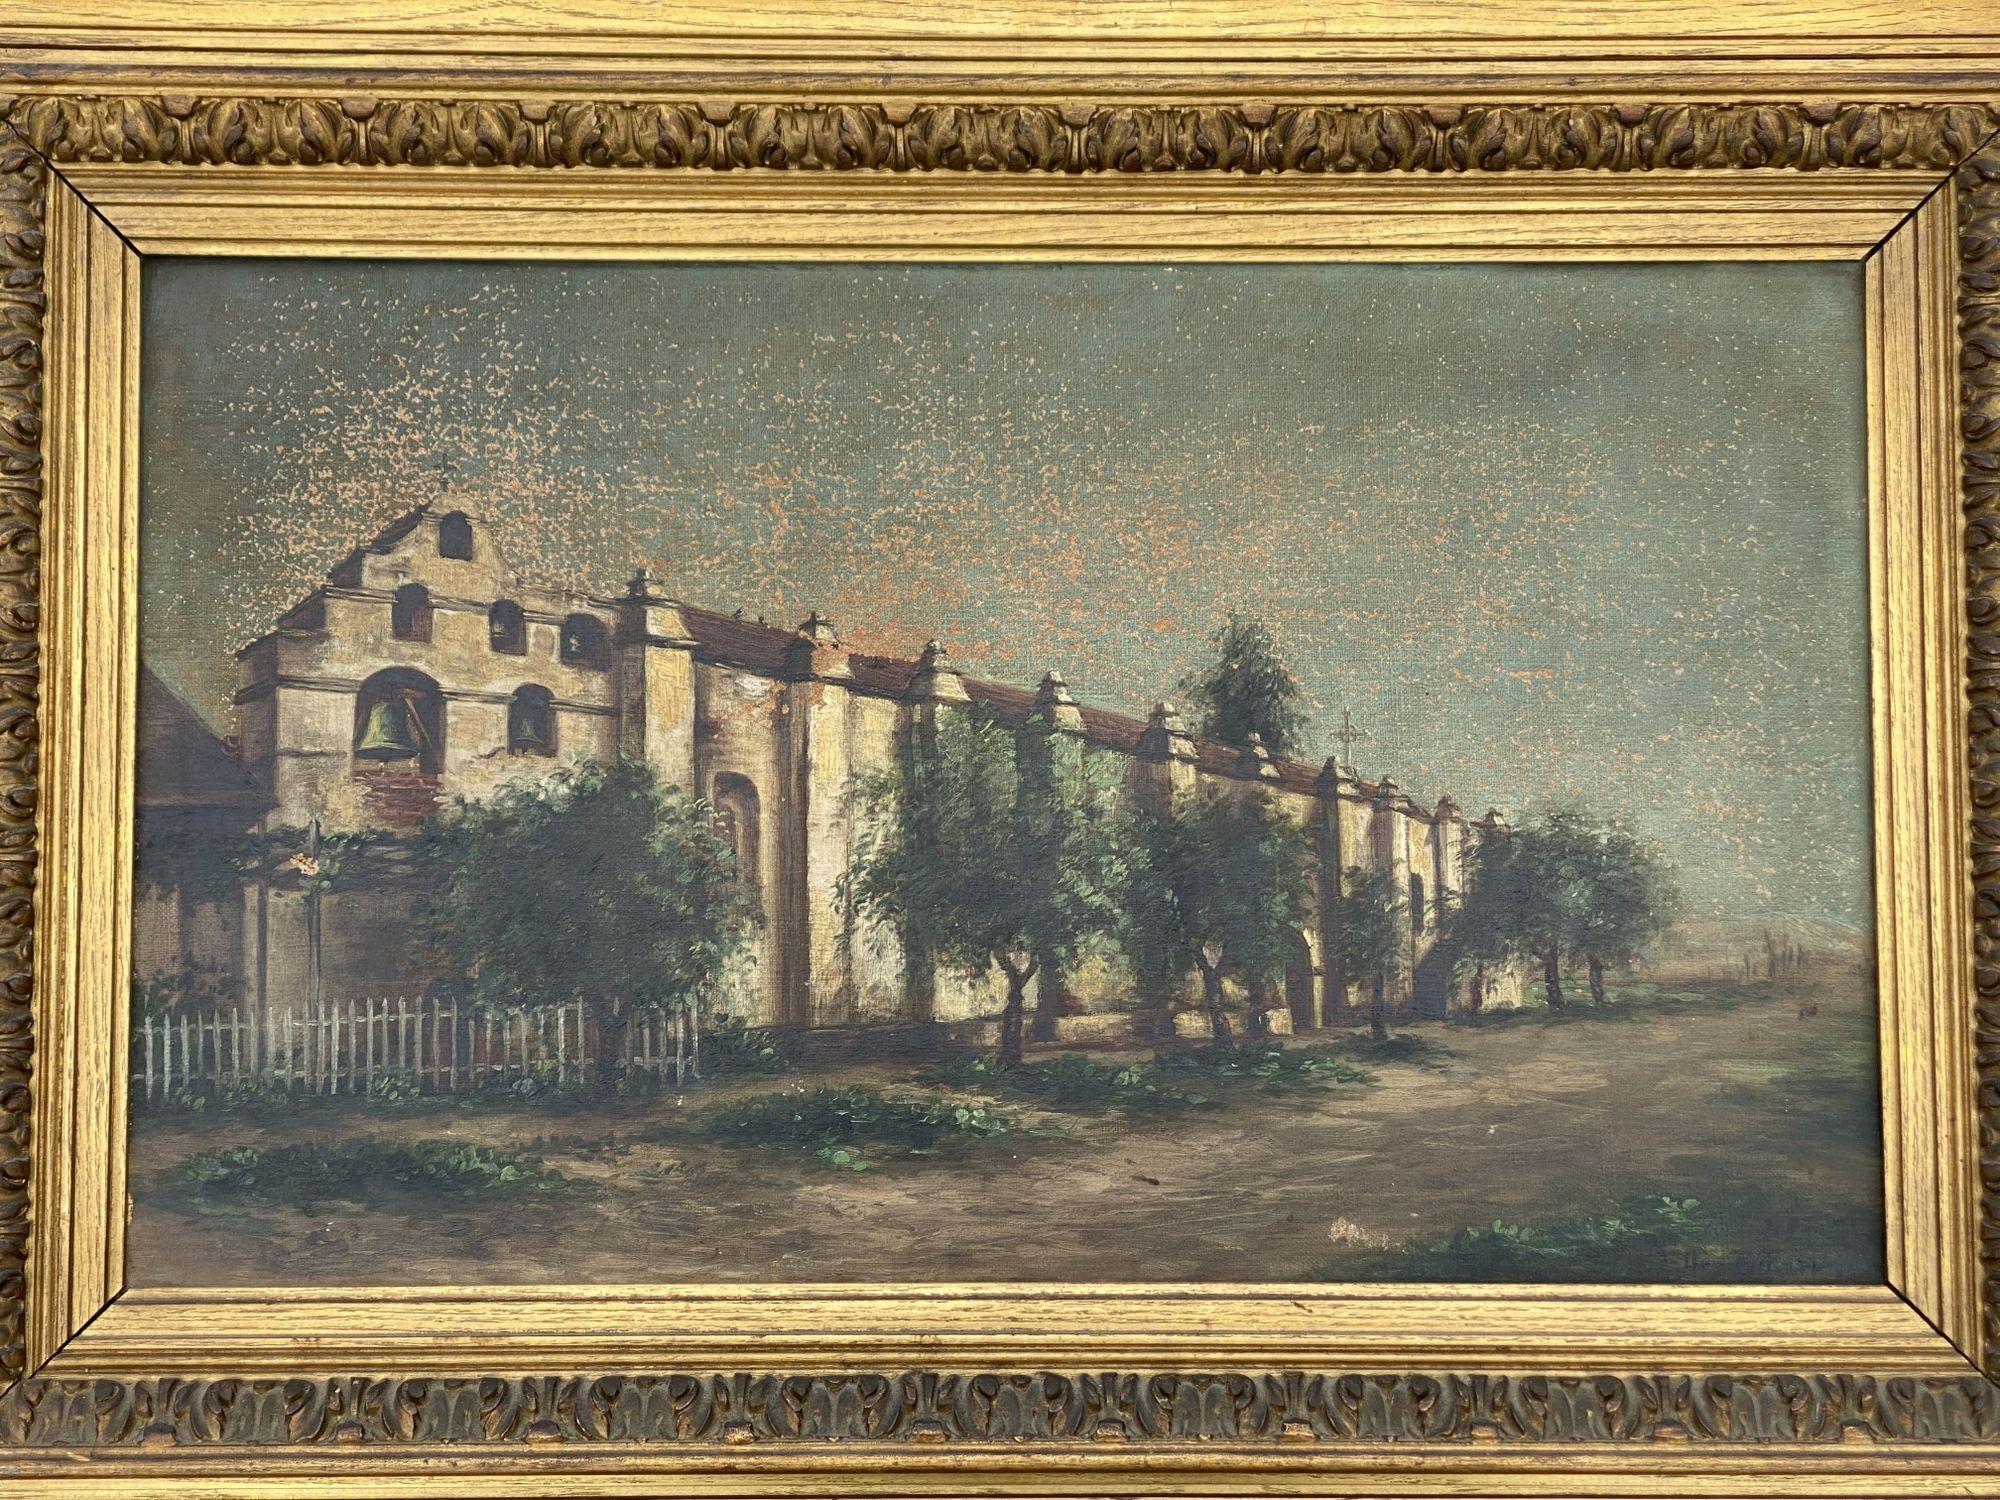 Late Victorian artwork oil painting on canvas in the original frame by Ellen B. Farr of the Pasadena San Gabriel Mission in Pasadena, California

Signed 